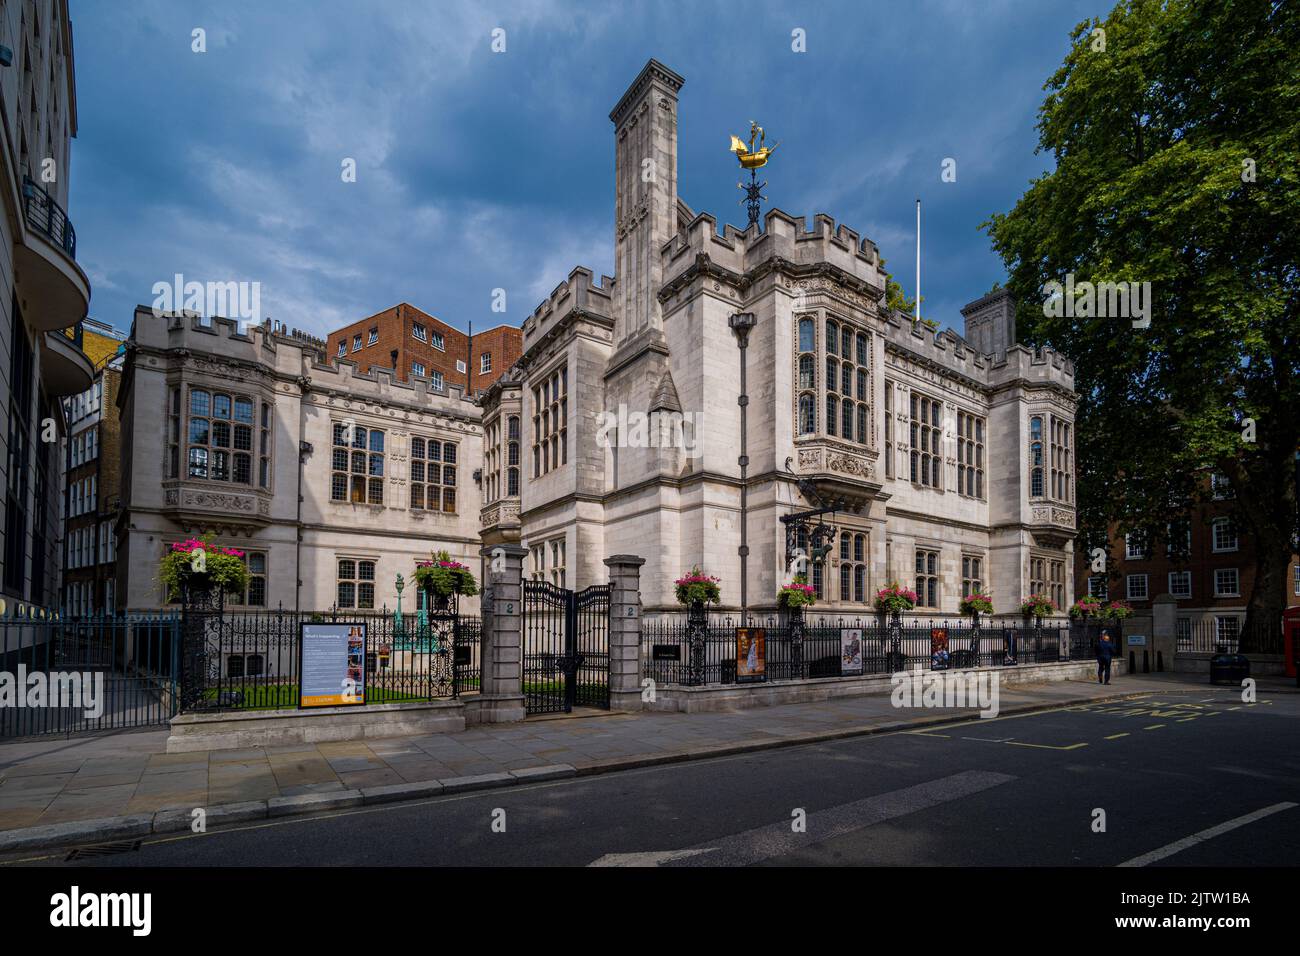 Two Temple Place, formerly Astor House, is a public art gallery building situated near Victoria Embankment Central London. Built 1895. 2 Temple Place. Stock Photo